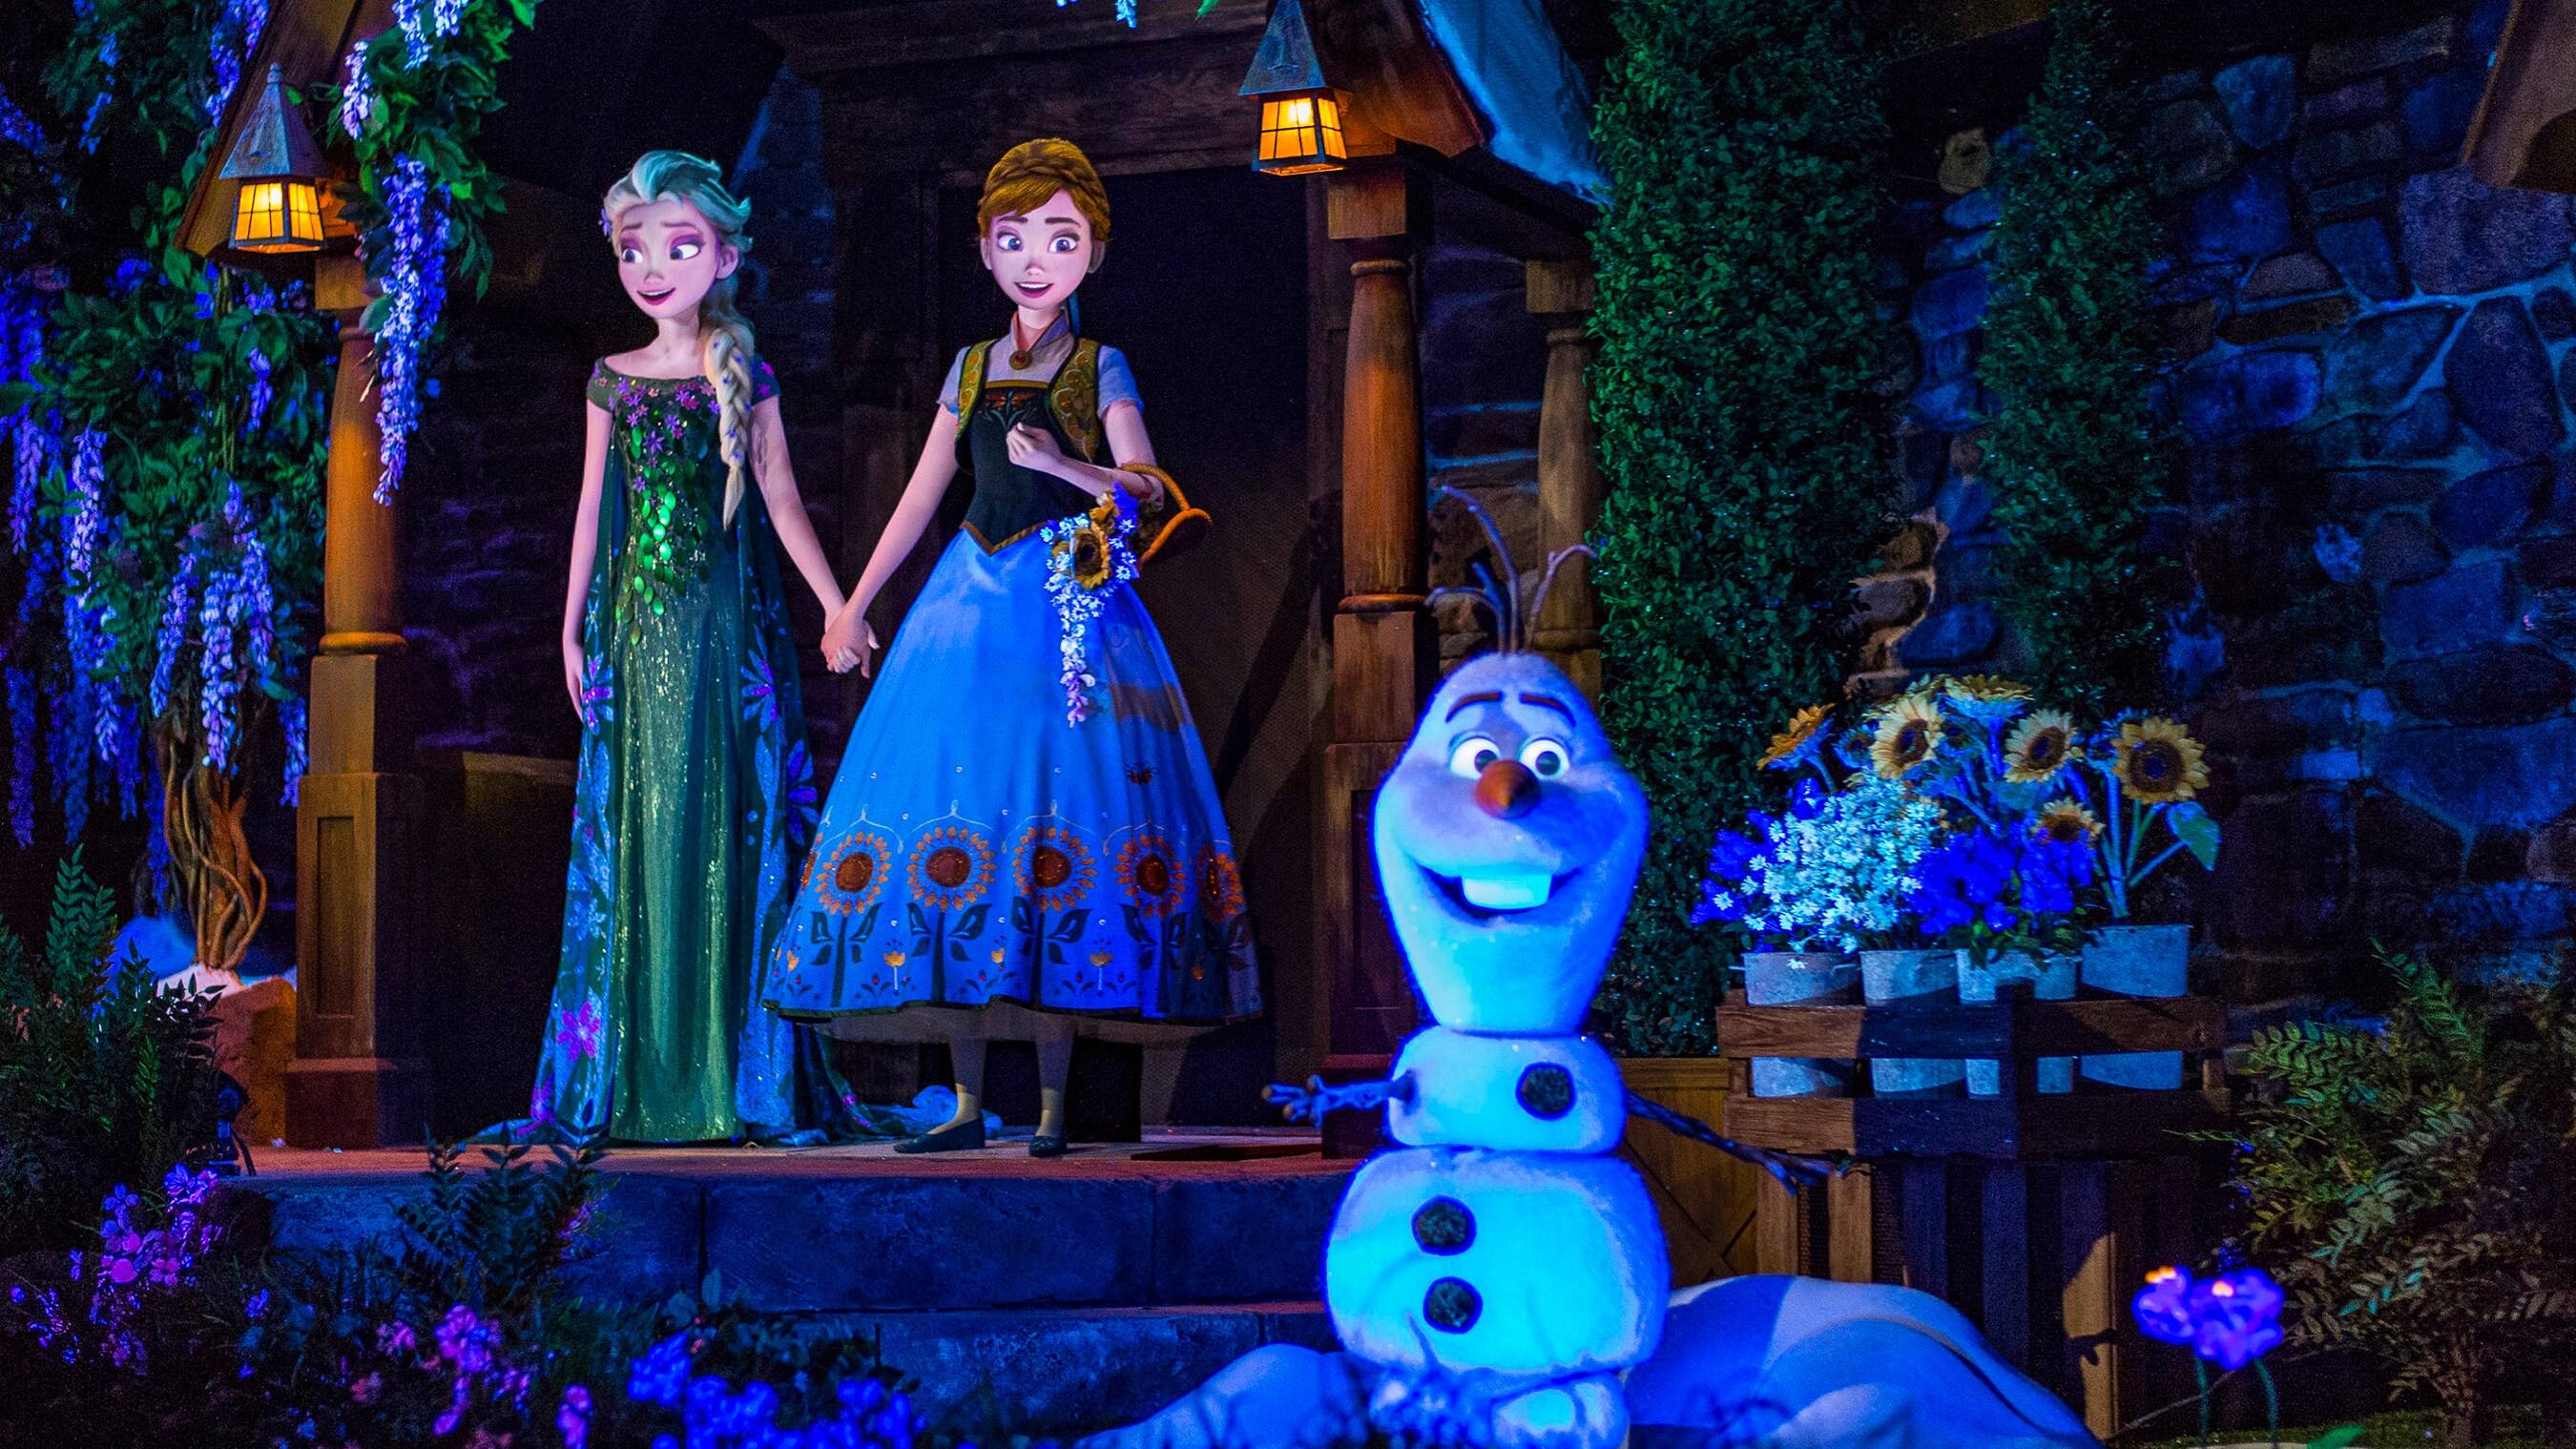 PhotoPass comes to Frozen Ever After with on-ride photo